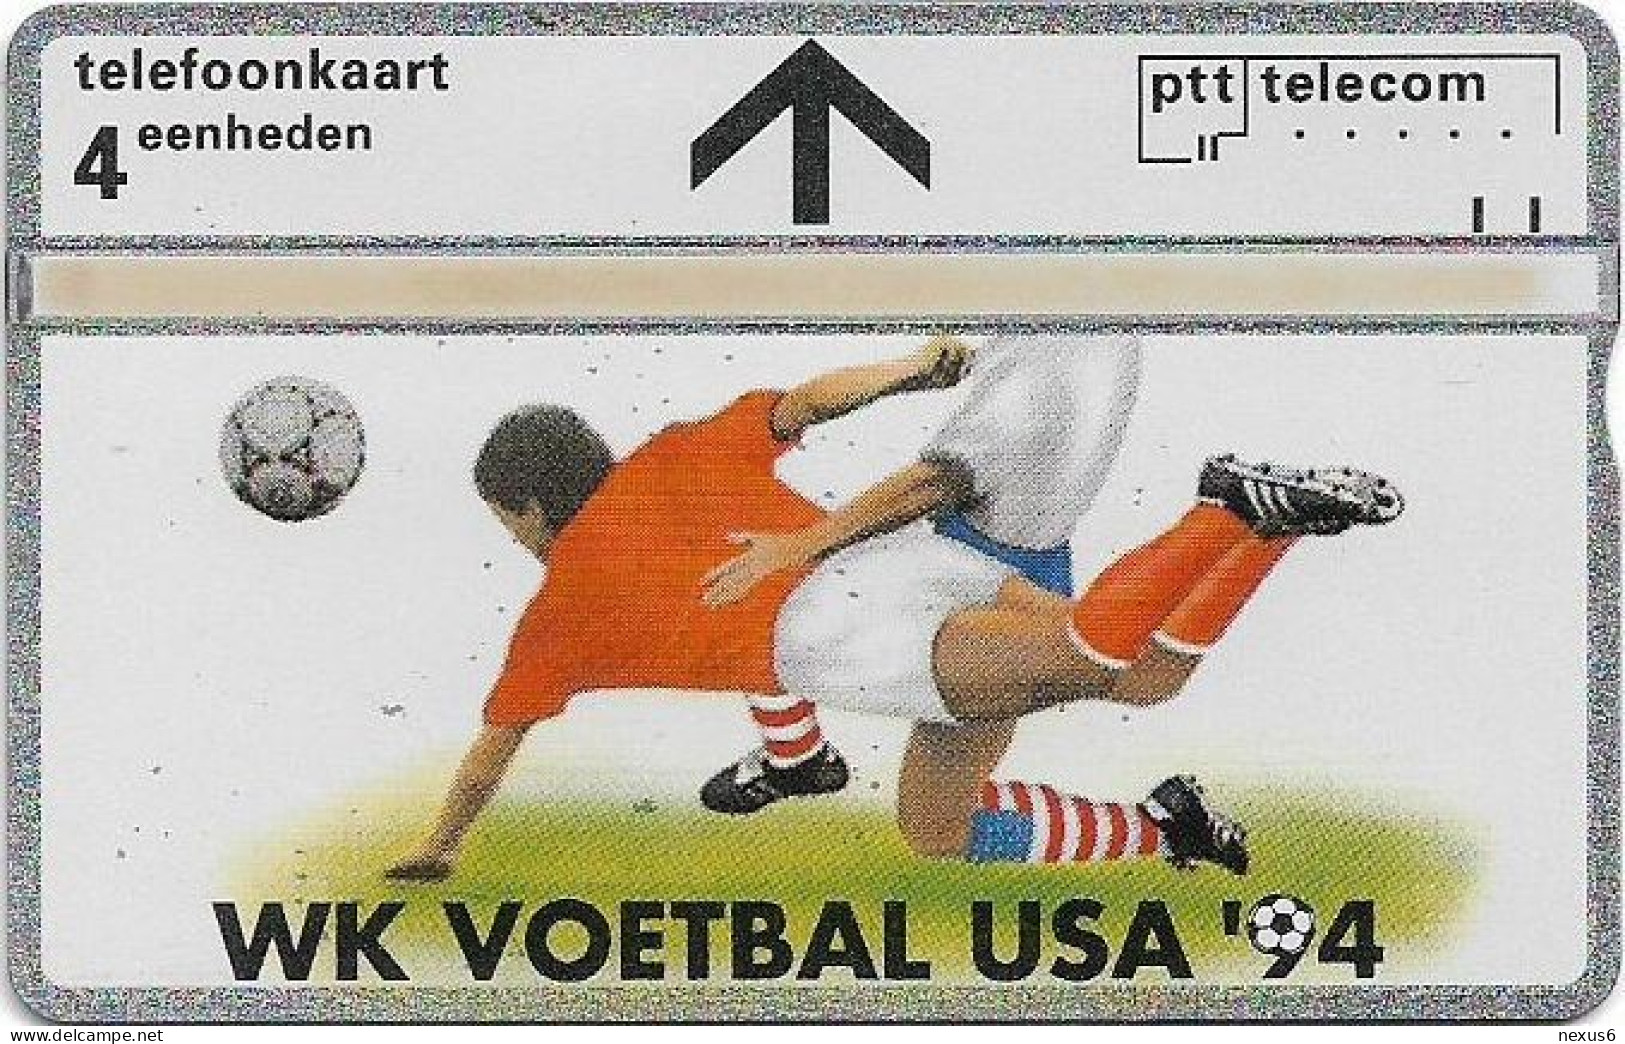 Netherlands - KPN - L&G - R104 - Wk Voetbal Usa '94 - 327E - 1994, 4Units, 3.000ex, Mint - Private